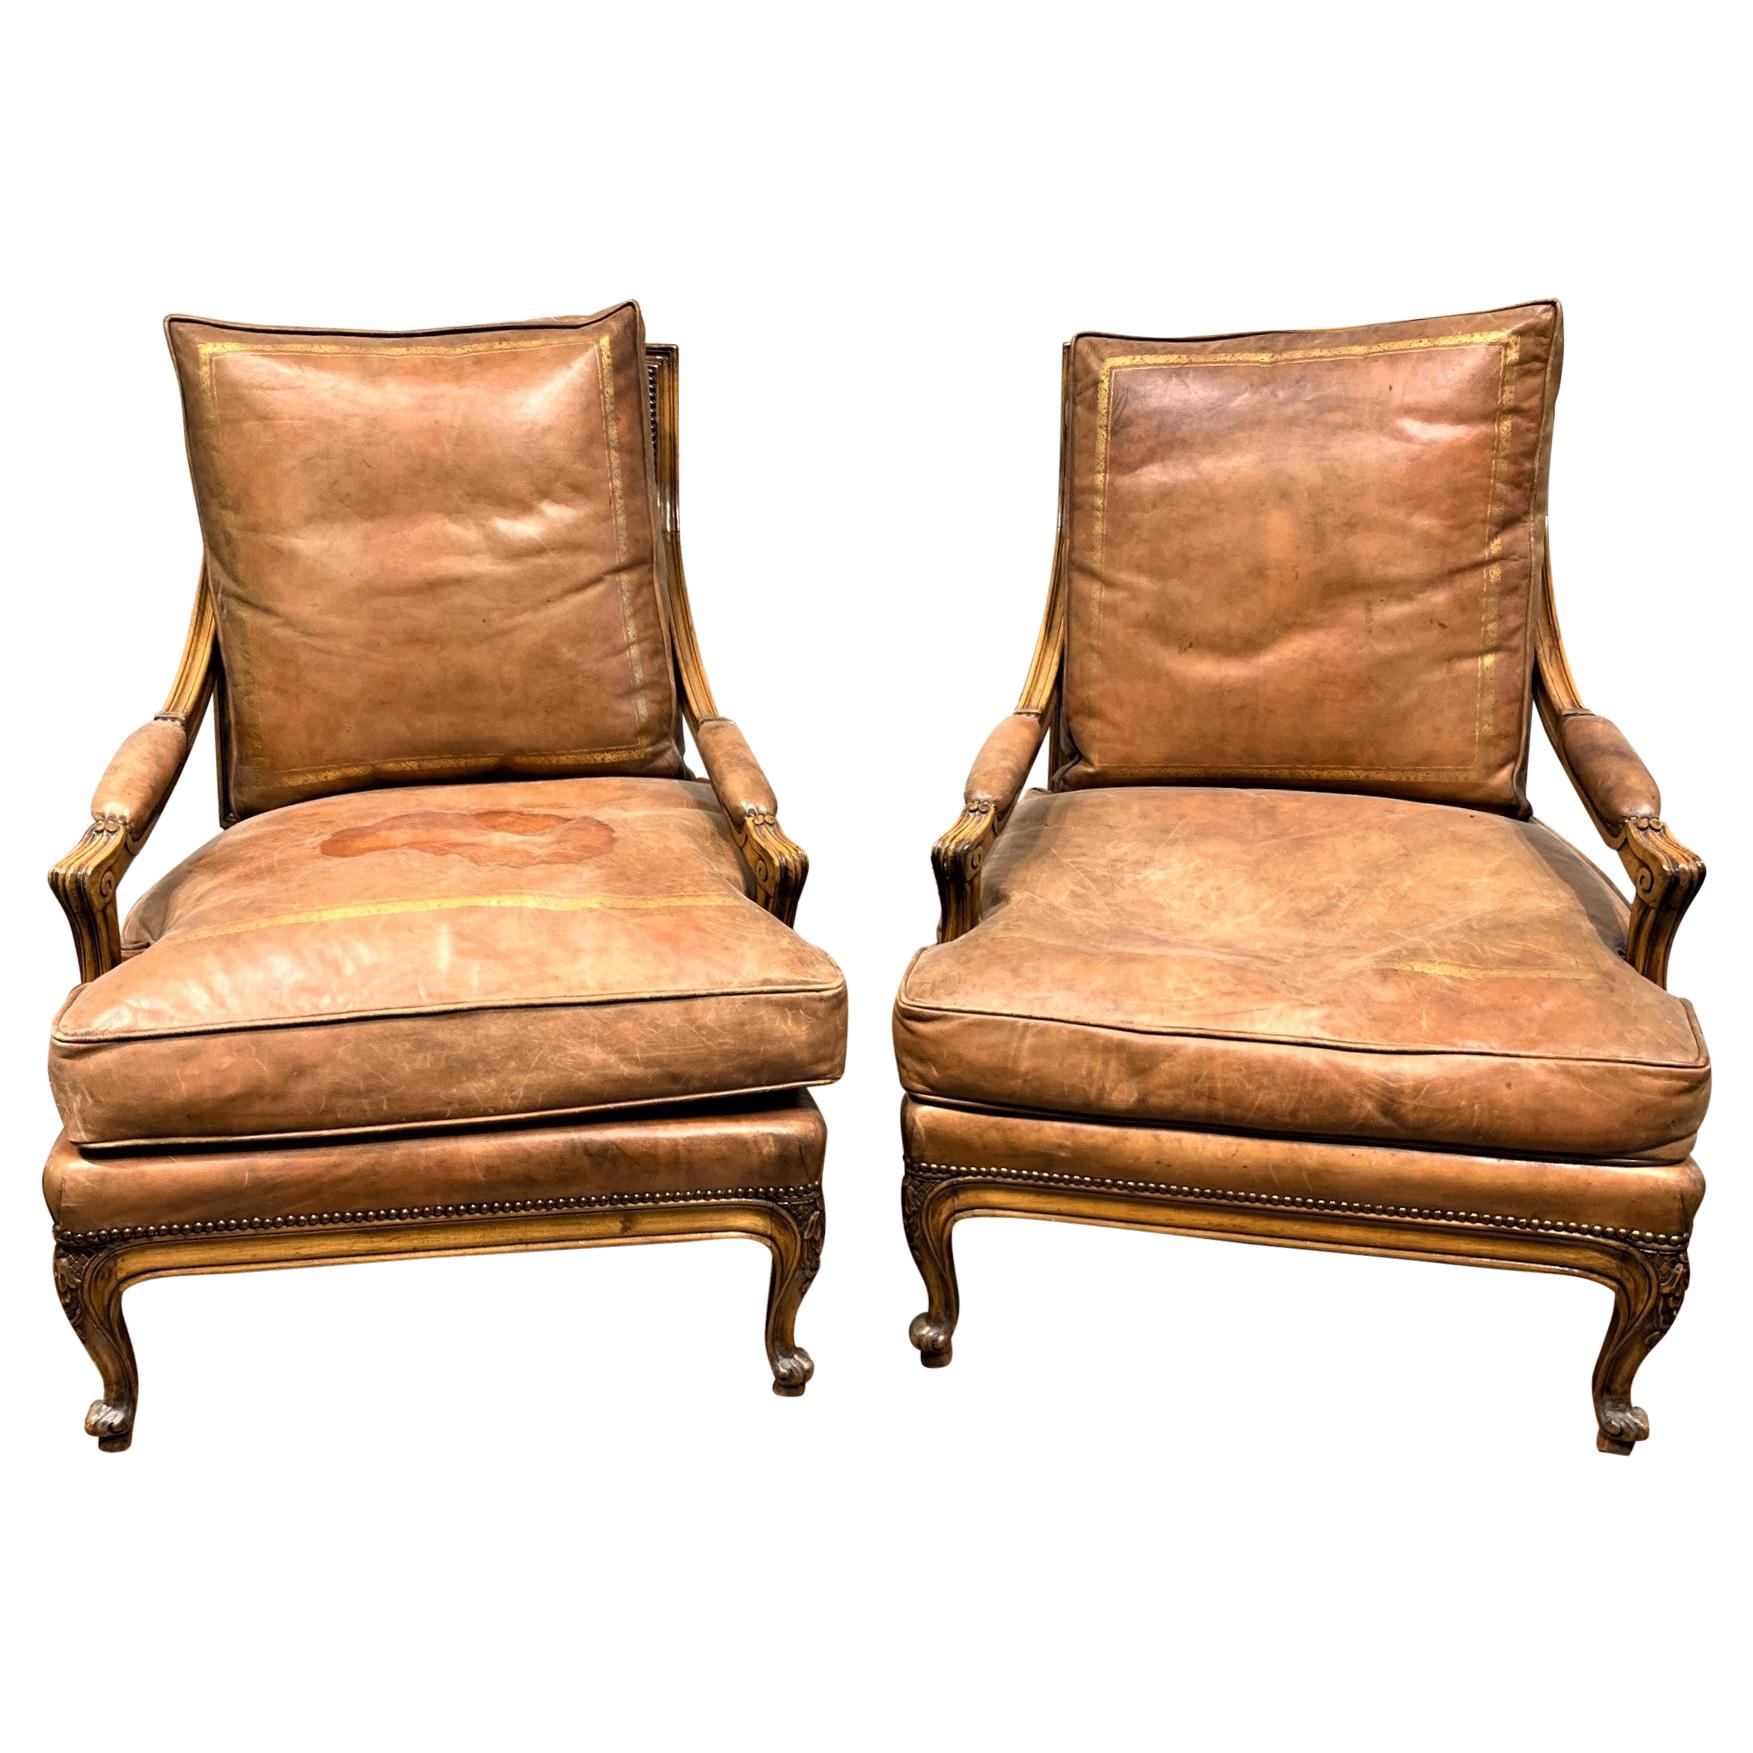 Pair of 19th Century French Fruitwood and Leather Cushion Armchairs